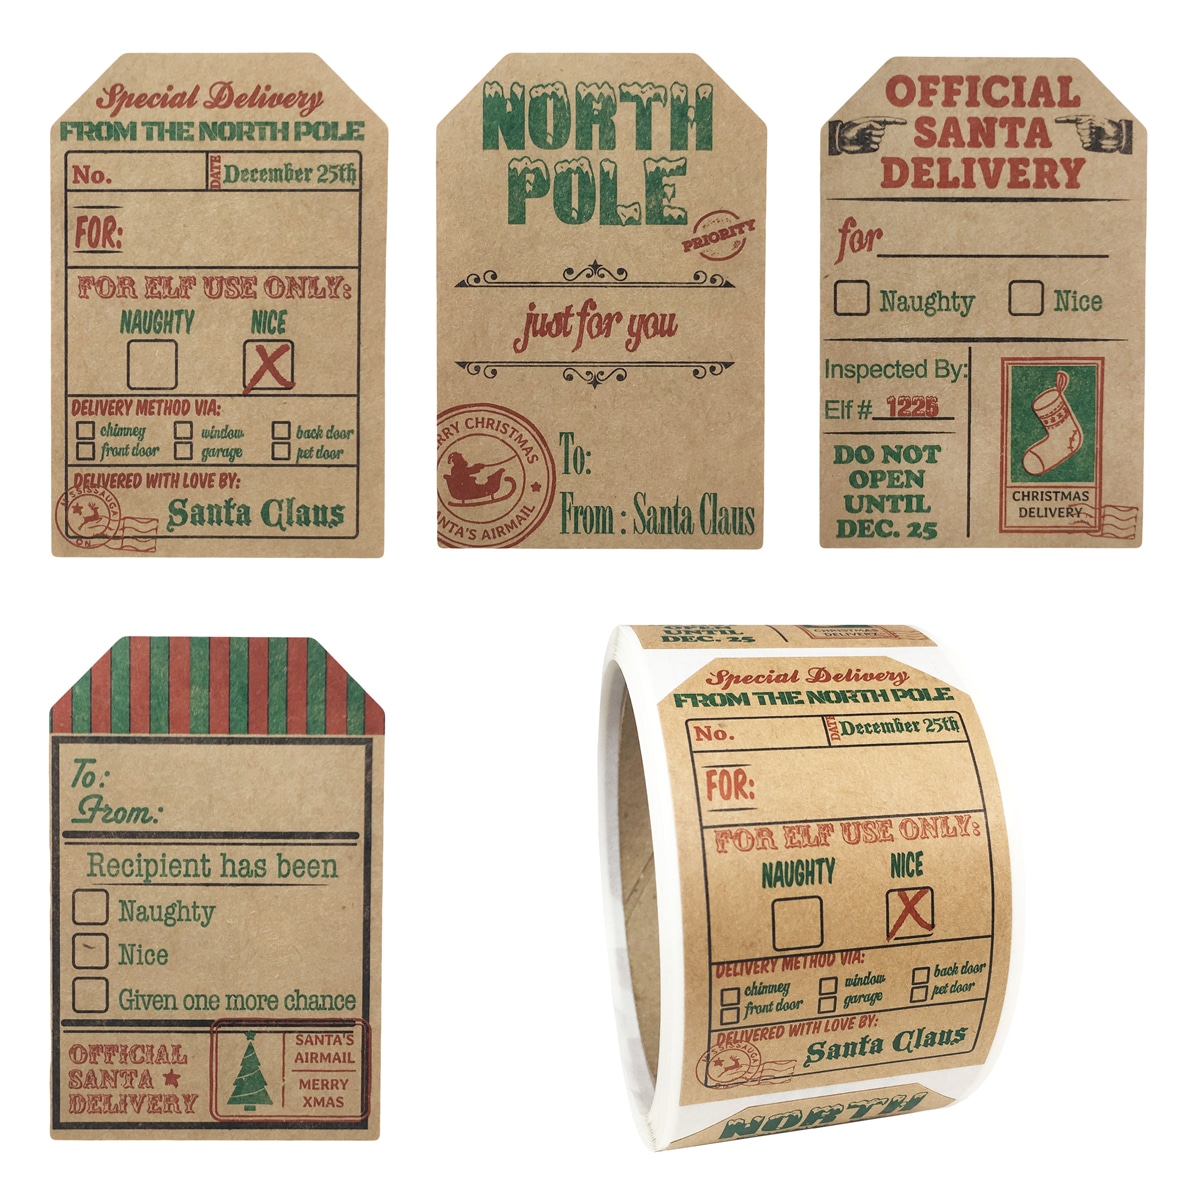 8 Christmas Gift Tags Printable, North Pole Mail Rustic -Press Print Party